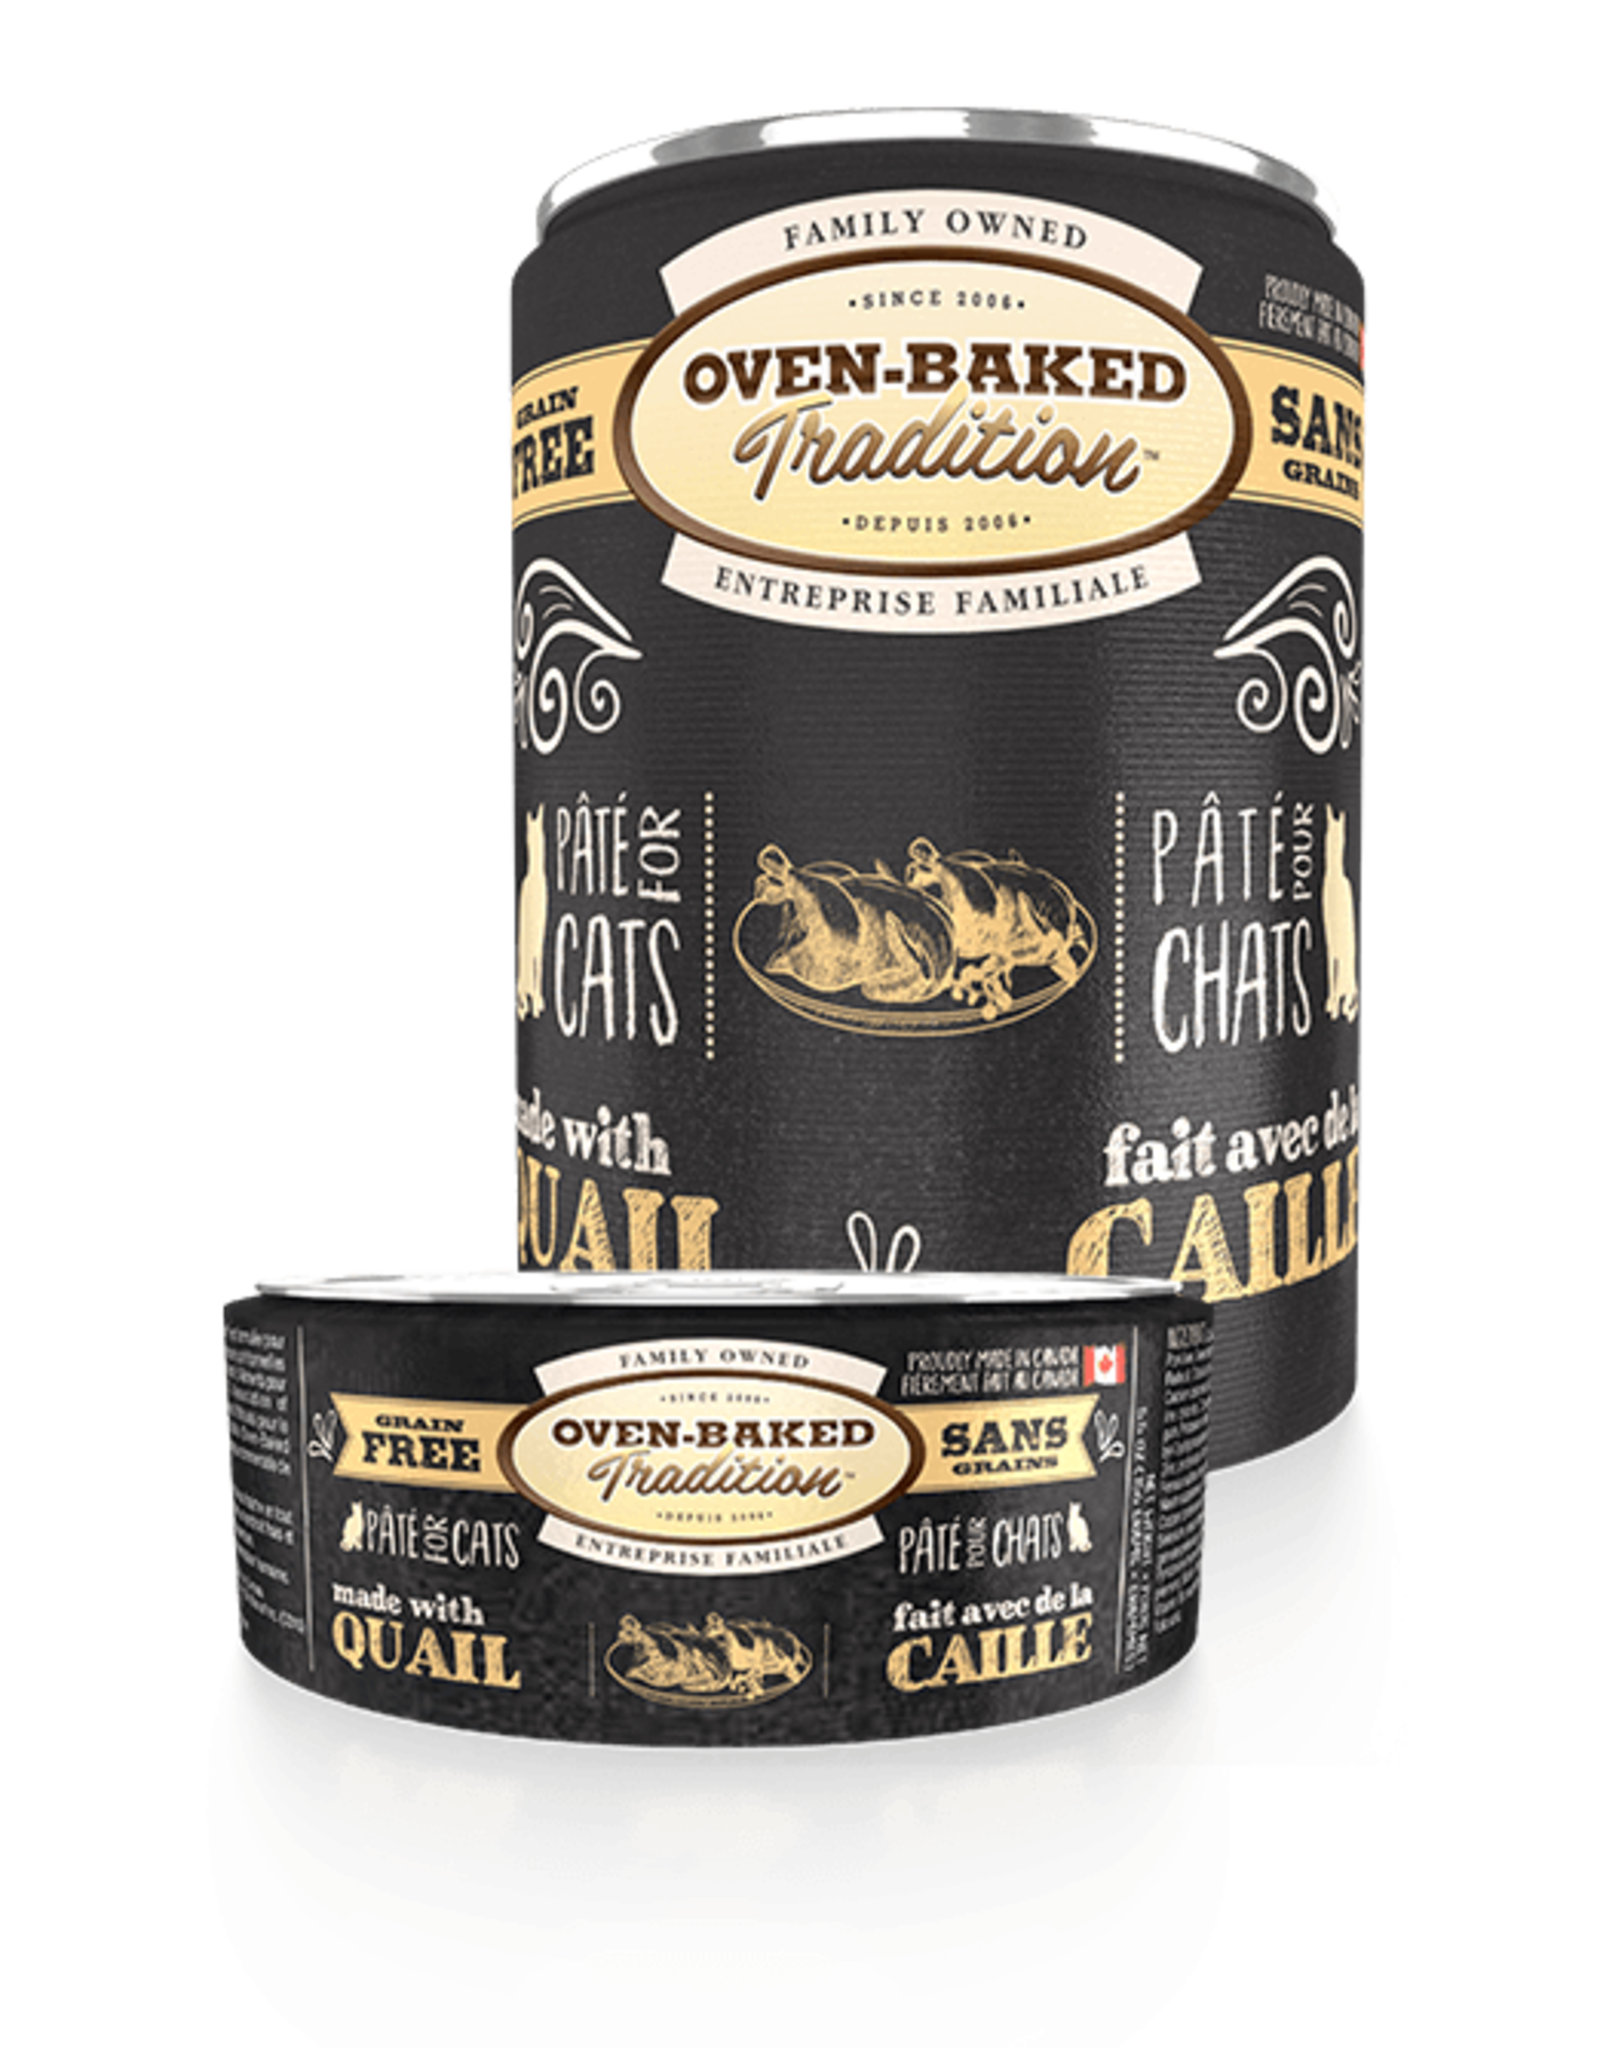 Oven-Baked Tradition Oven-Baked Paté Caille 5.5oz (Chat)